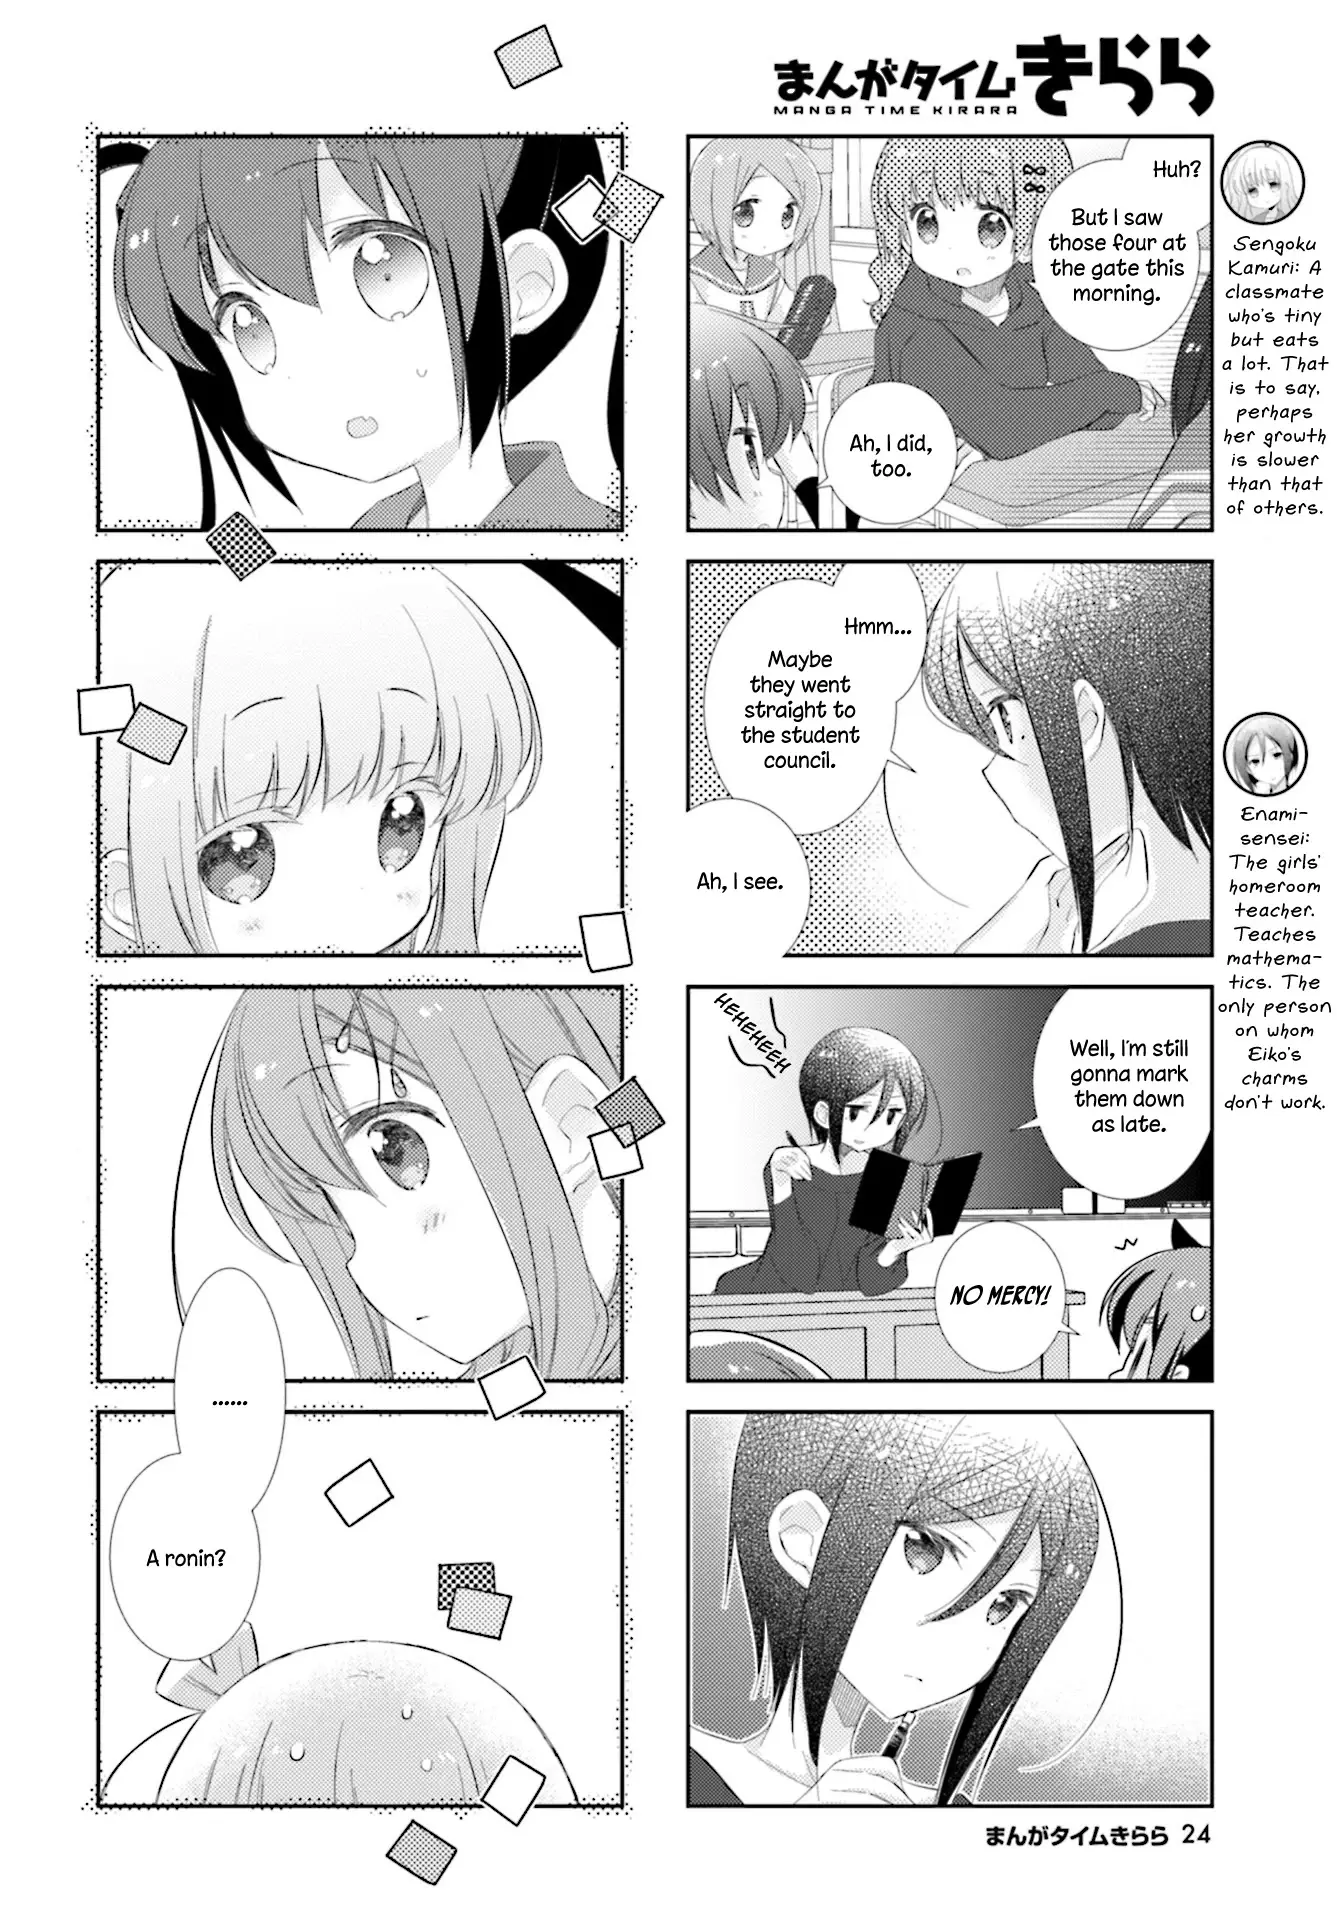 Slow Start - 93 page 4-25ae4662